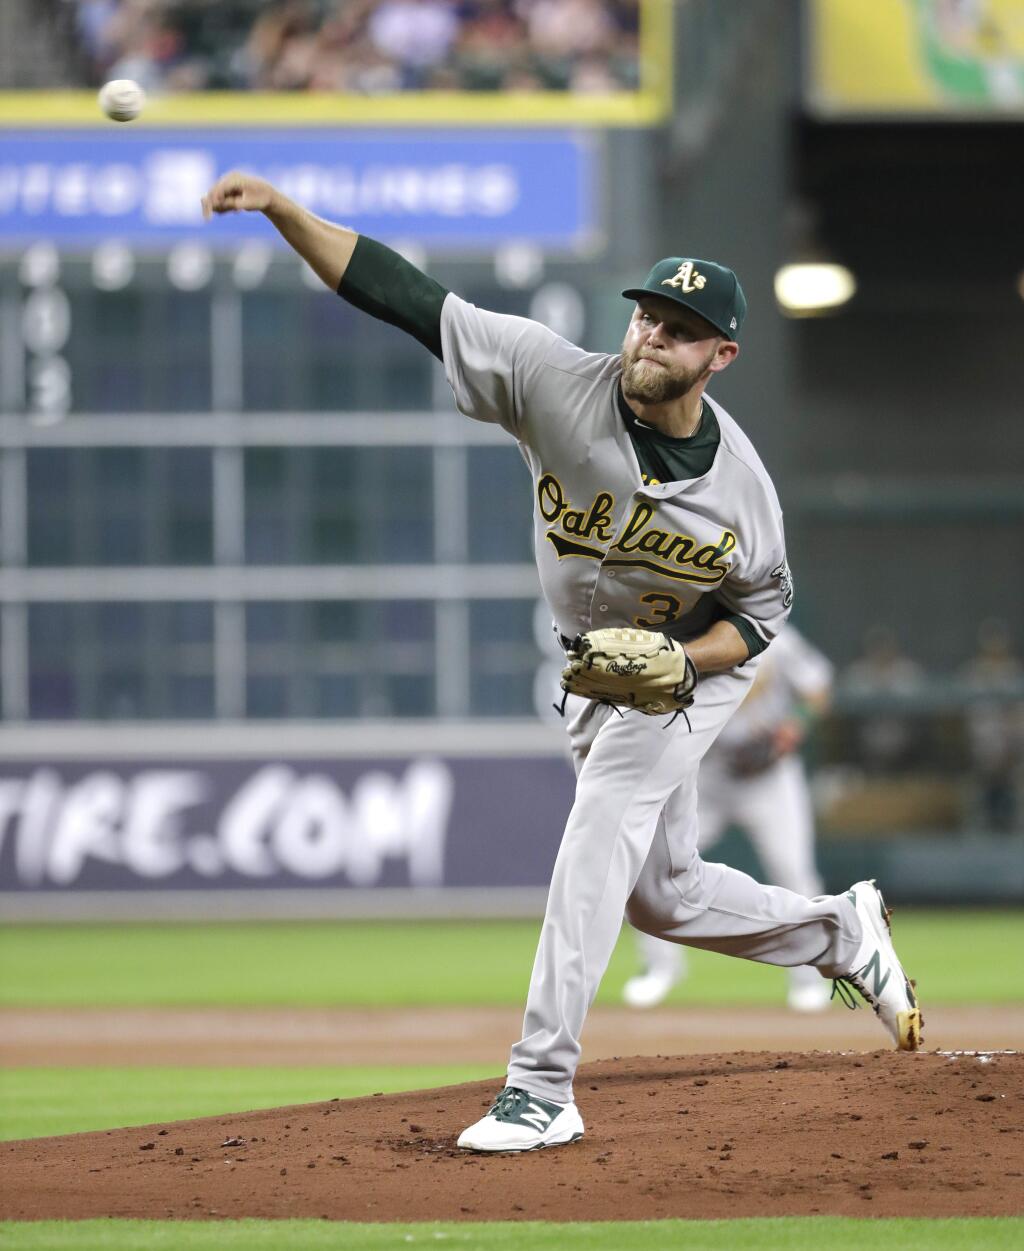 Oakland Athletics starting pitcher Jesse Hahn throws against the Houston Astros during the first inning of a baseball game, Wednesday, June 28, 2017, in Houston. (AP Photo/David J. Phillip)